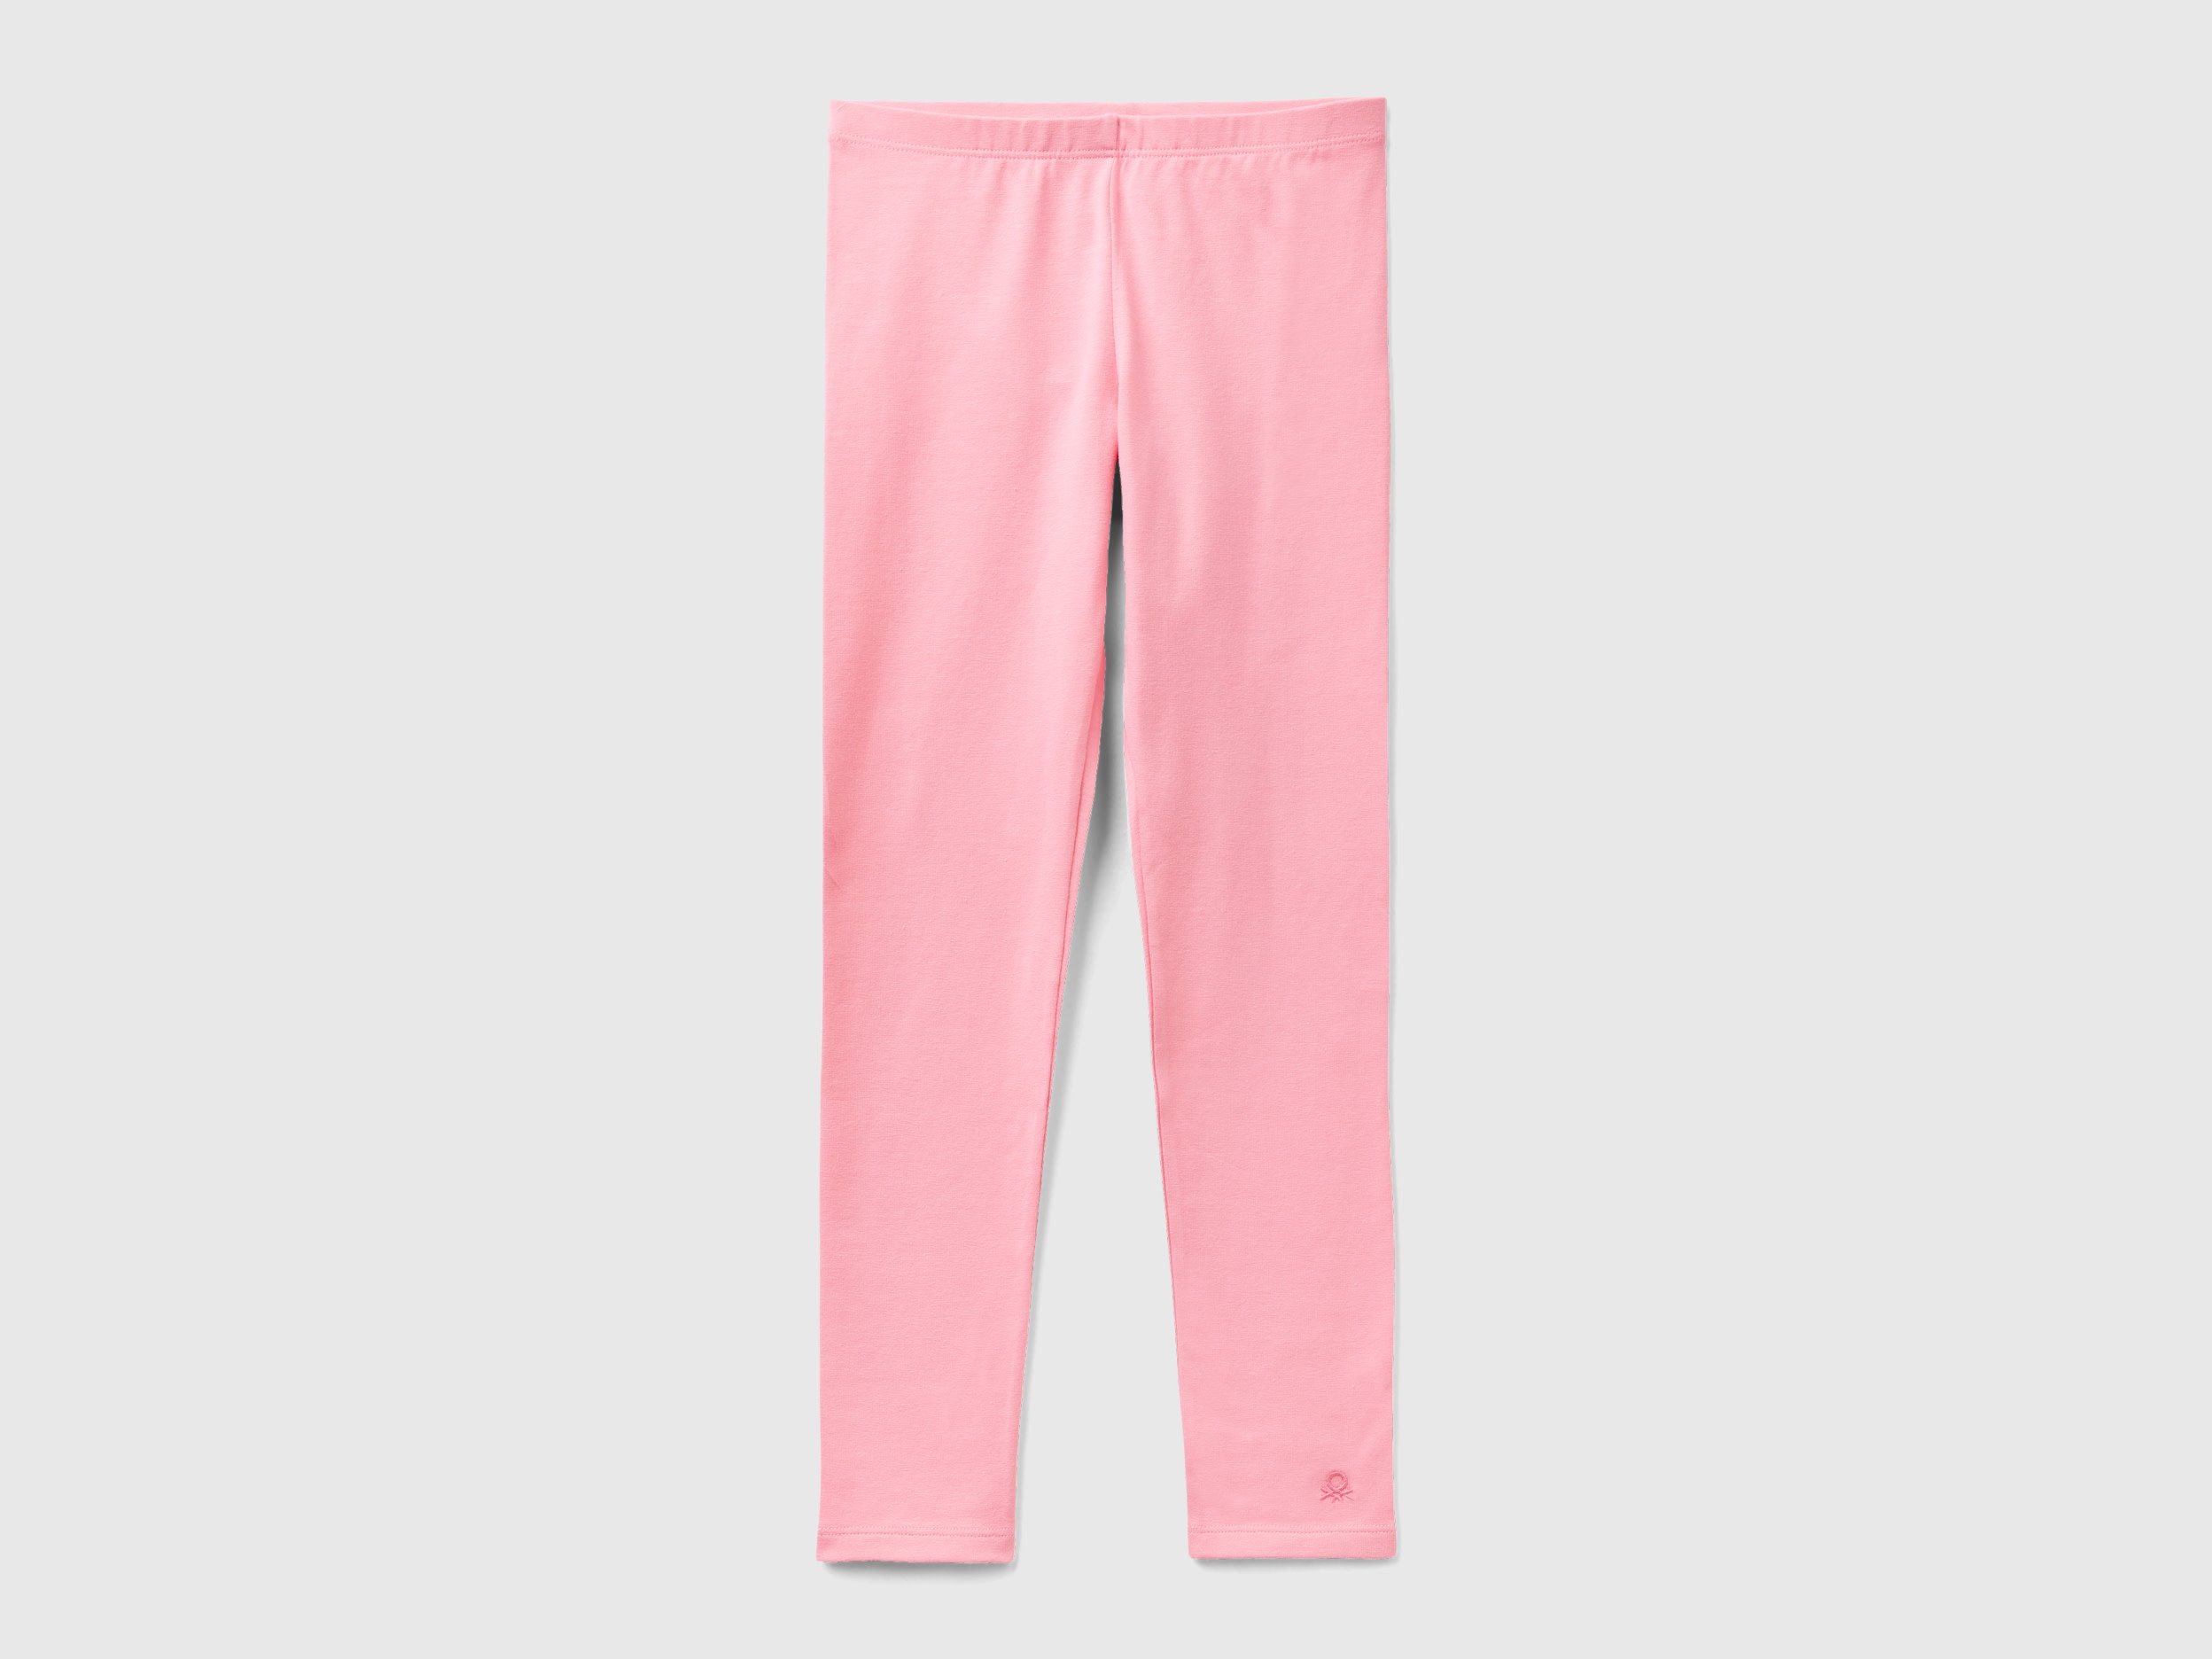 Benetton, Leggings In Stretch Cotton With Logo, size M, Pink, Kids